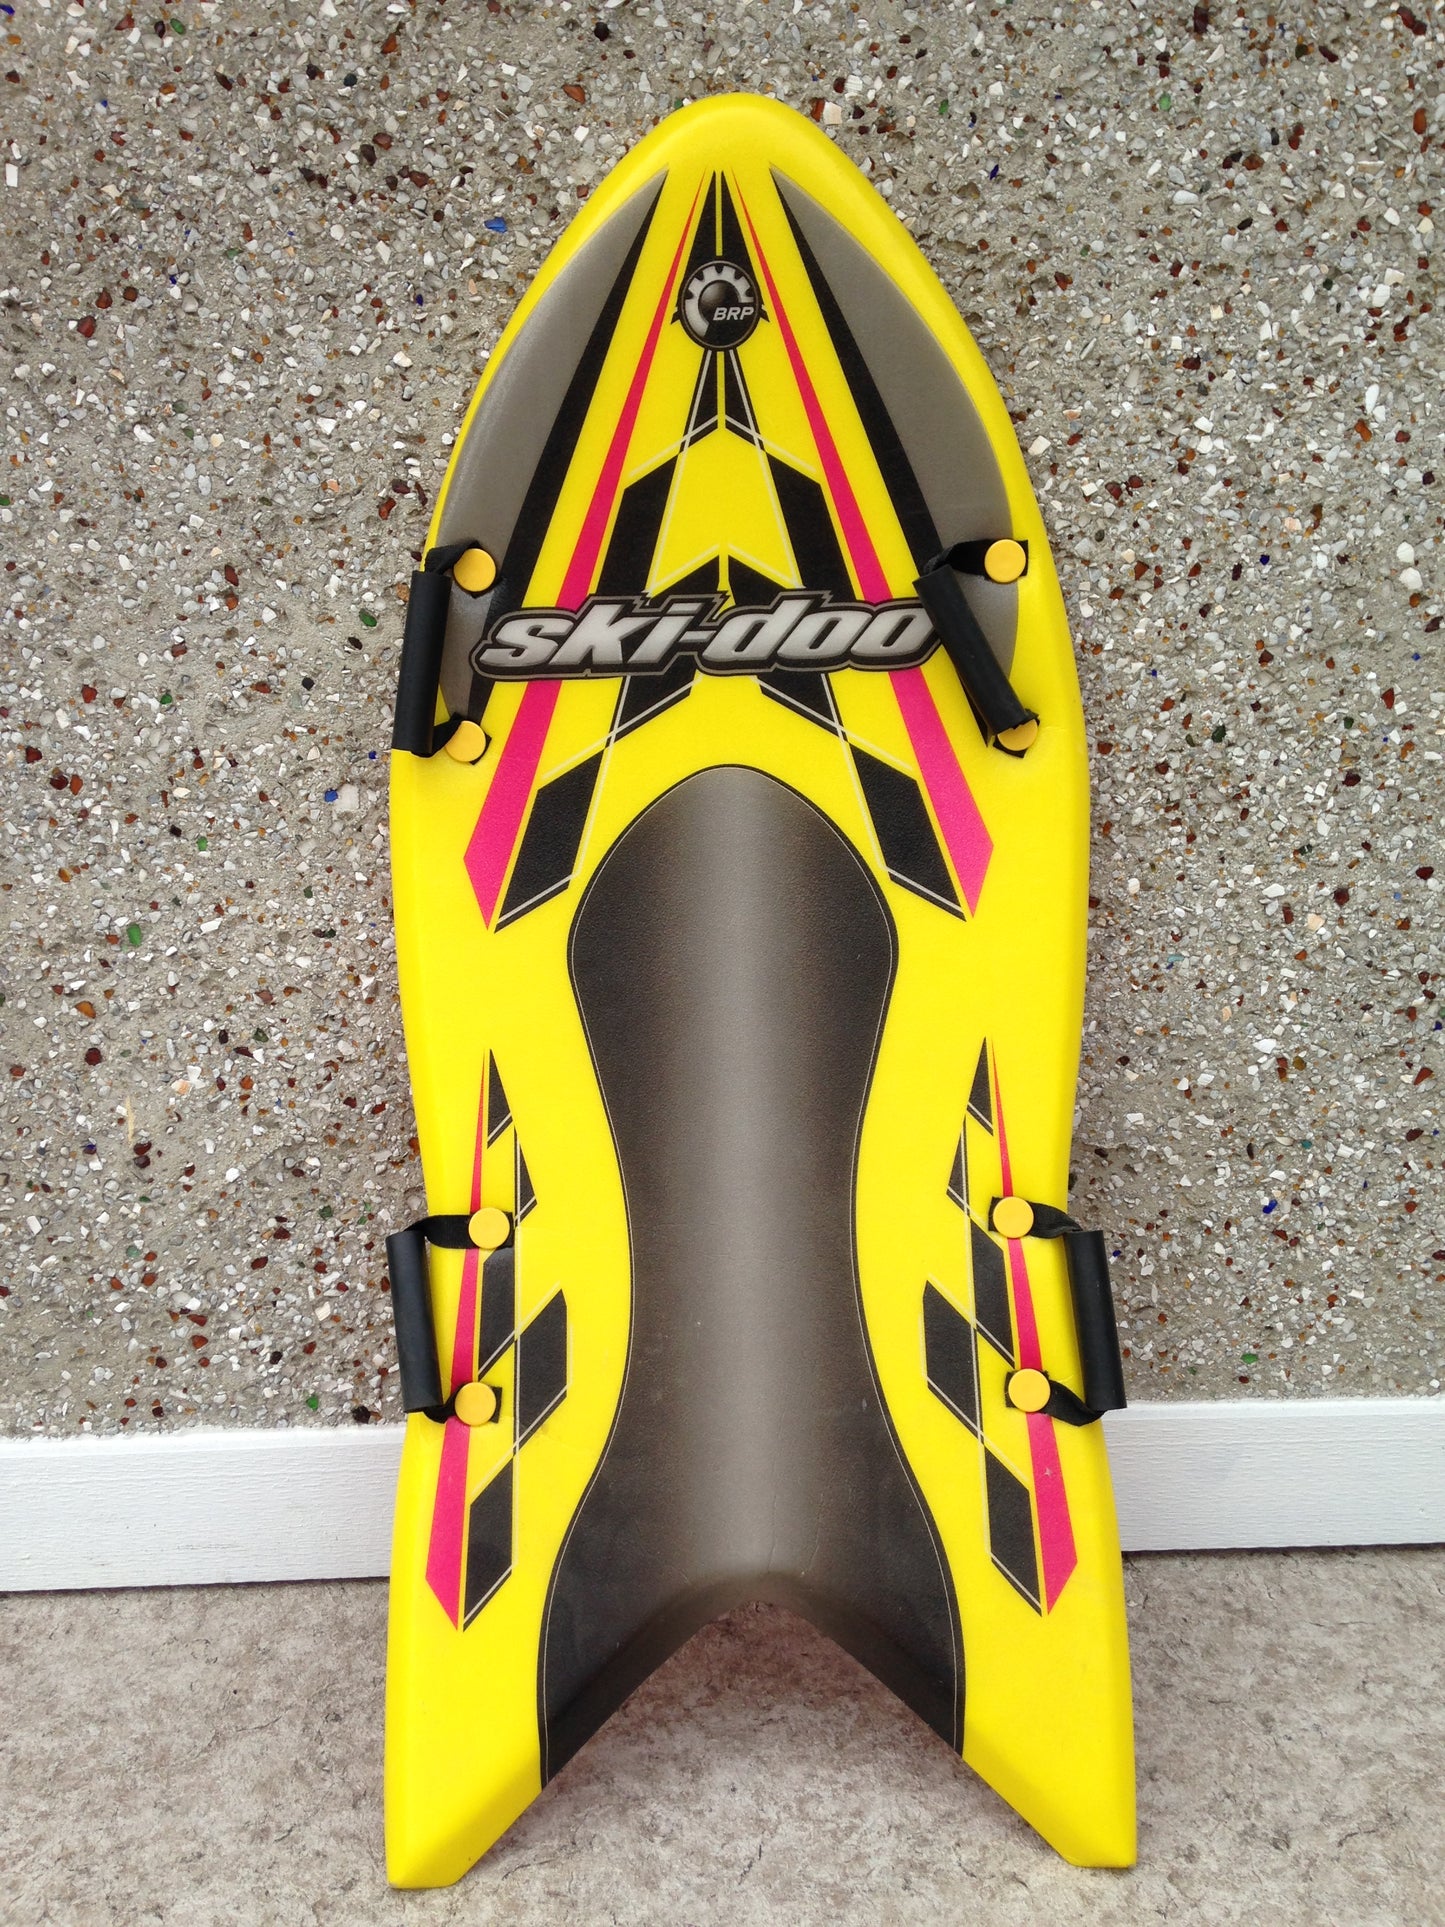 Snow Sled Ski Doo Foam Racing Sled Child Size 4-12 Excellent As New Yellow Multi